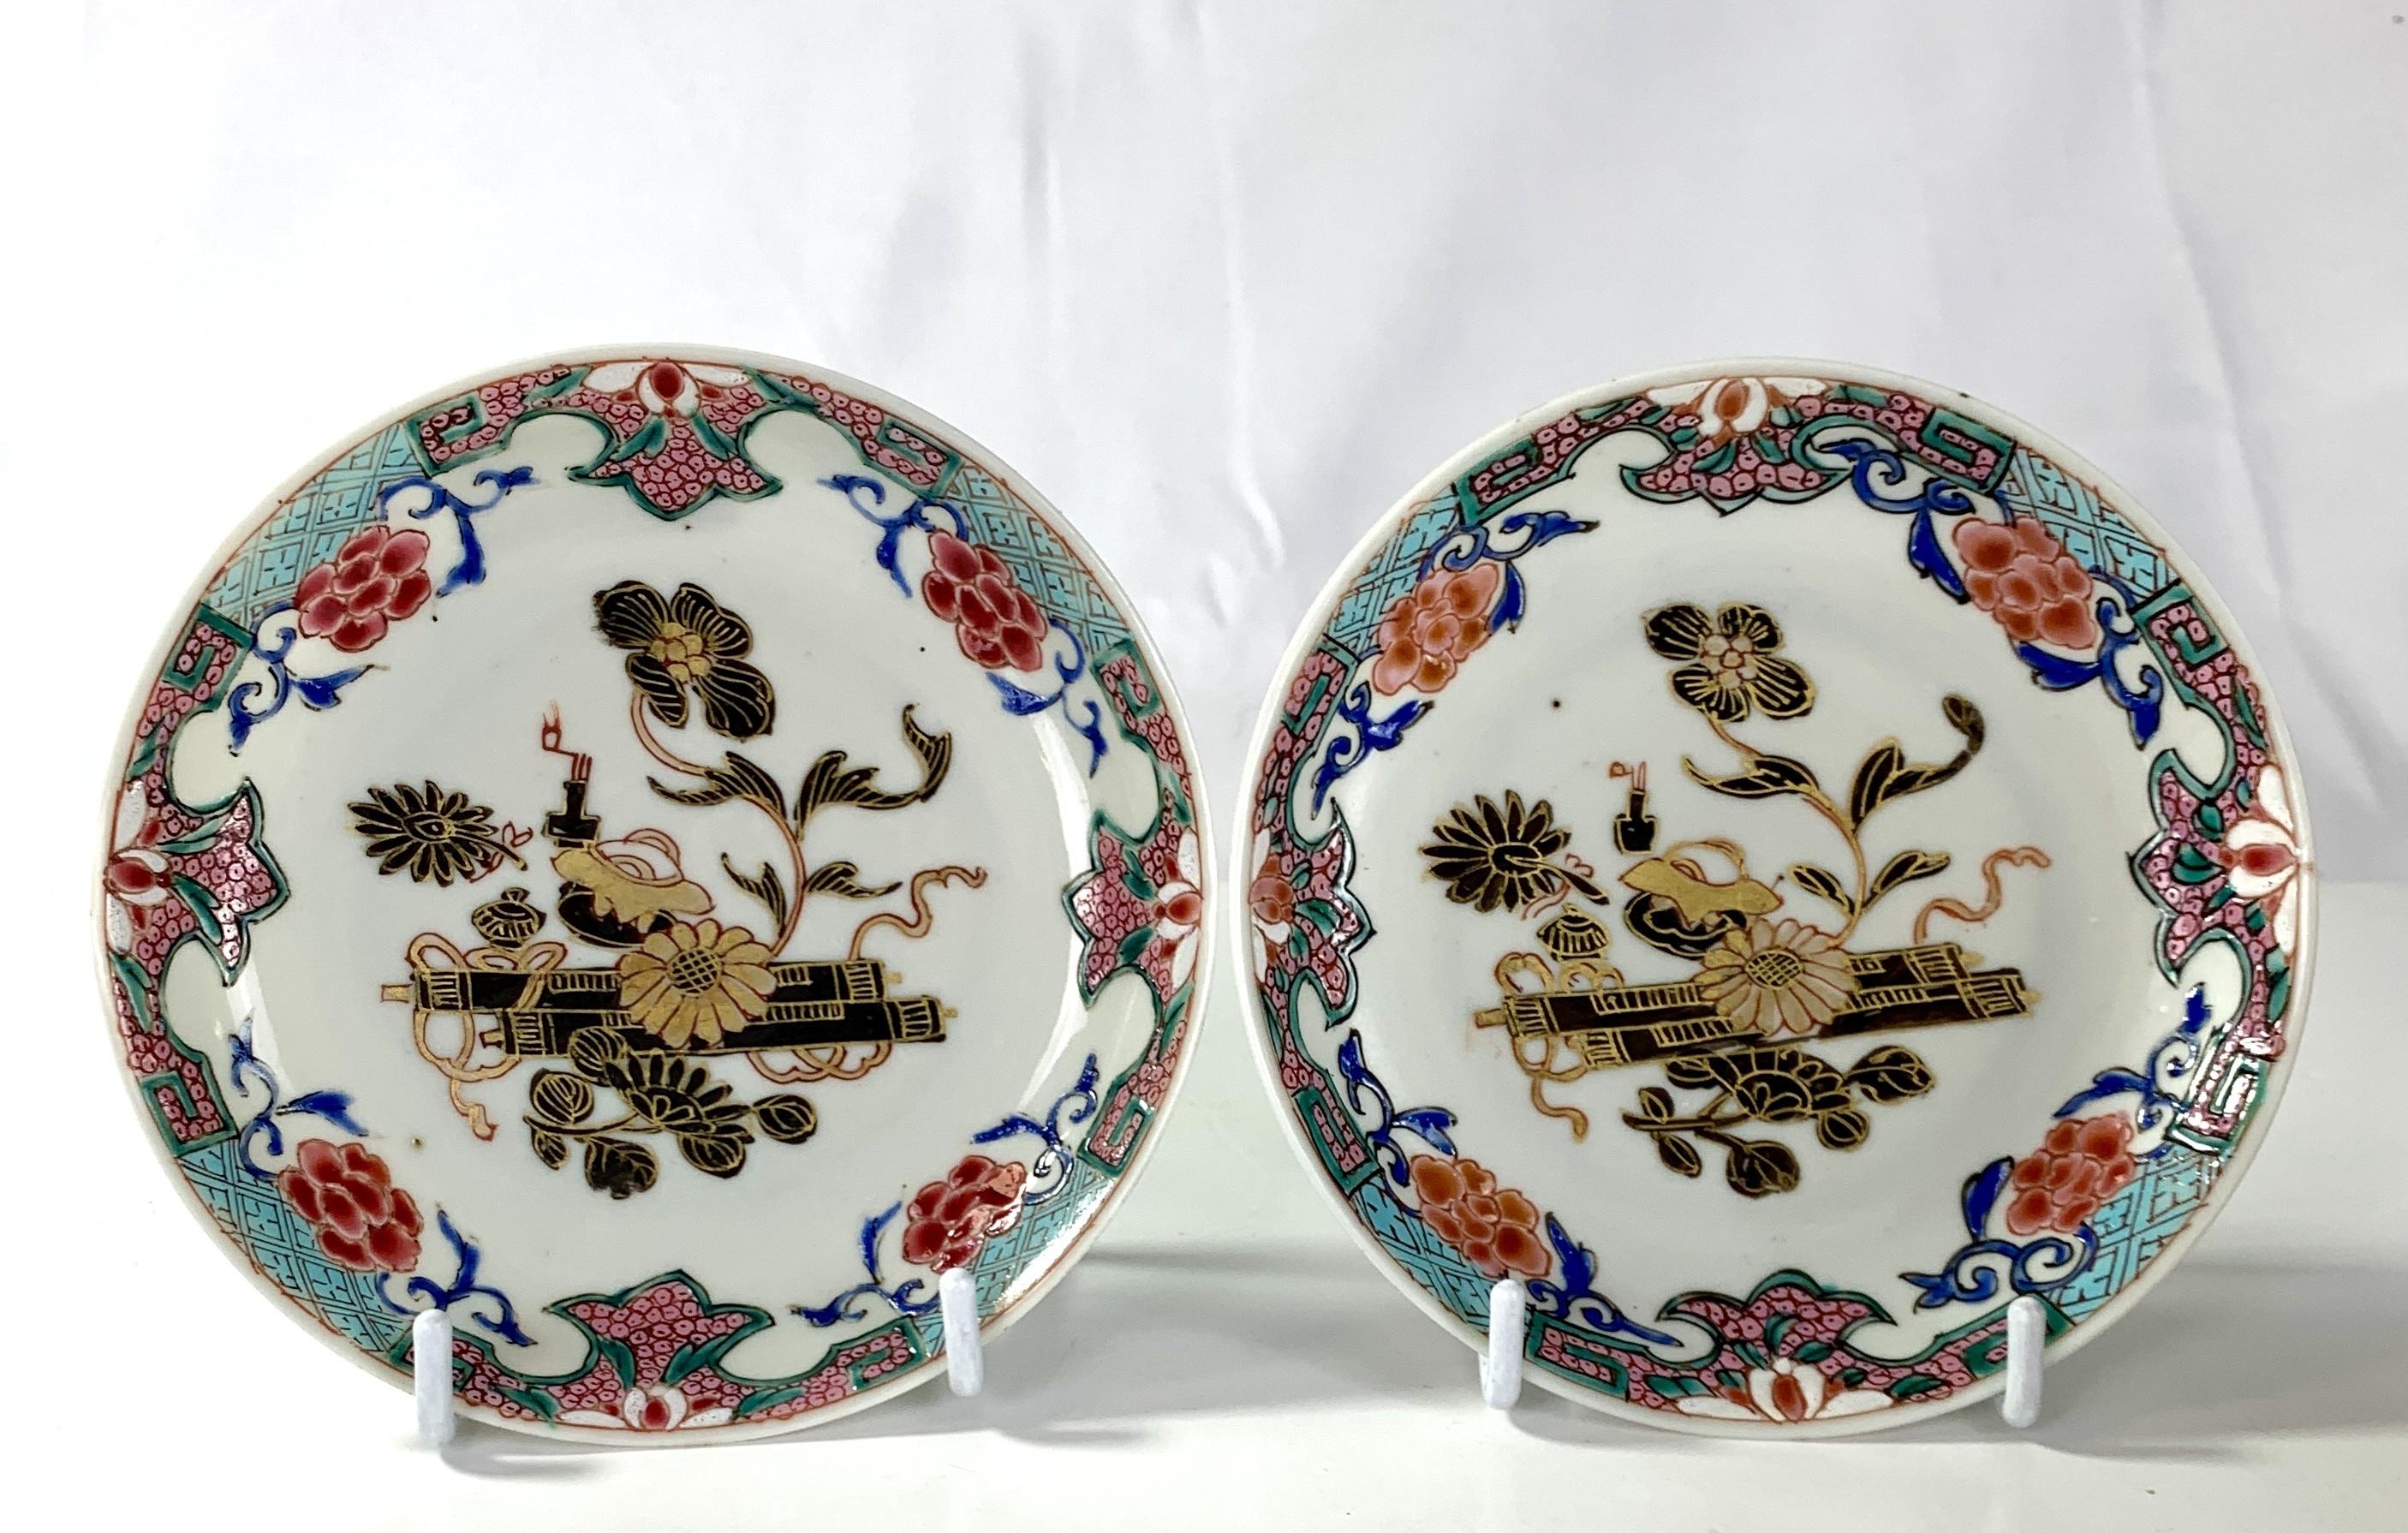 This pair of lovely hand-painted saucers were made in 18th-century China circa 1780.
In the center of each saucer, we see flowers painted in gold and midnight brown.
The fabulous Famille Rose colors of the border catch the eye. 
The combination of